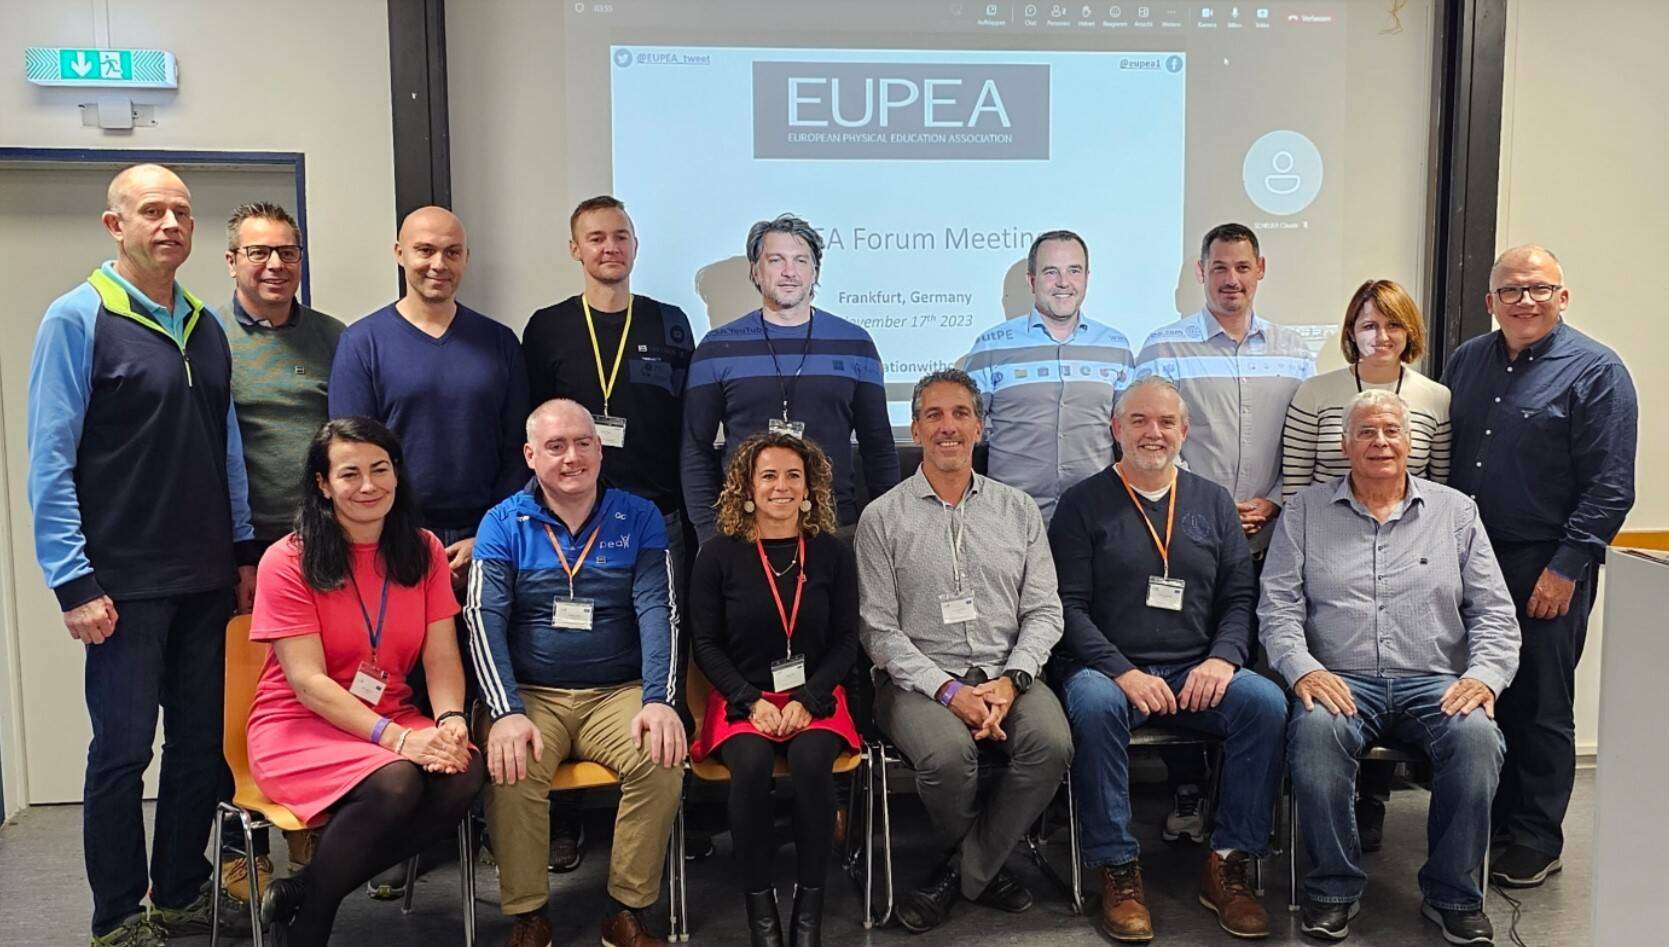 Tamács Csányi is re-elected board member of the European Physical Education Association